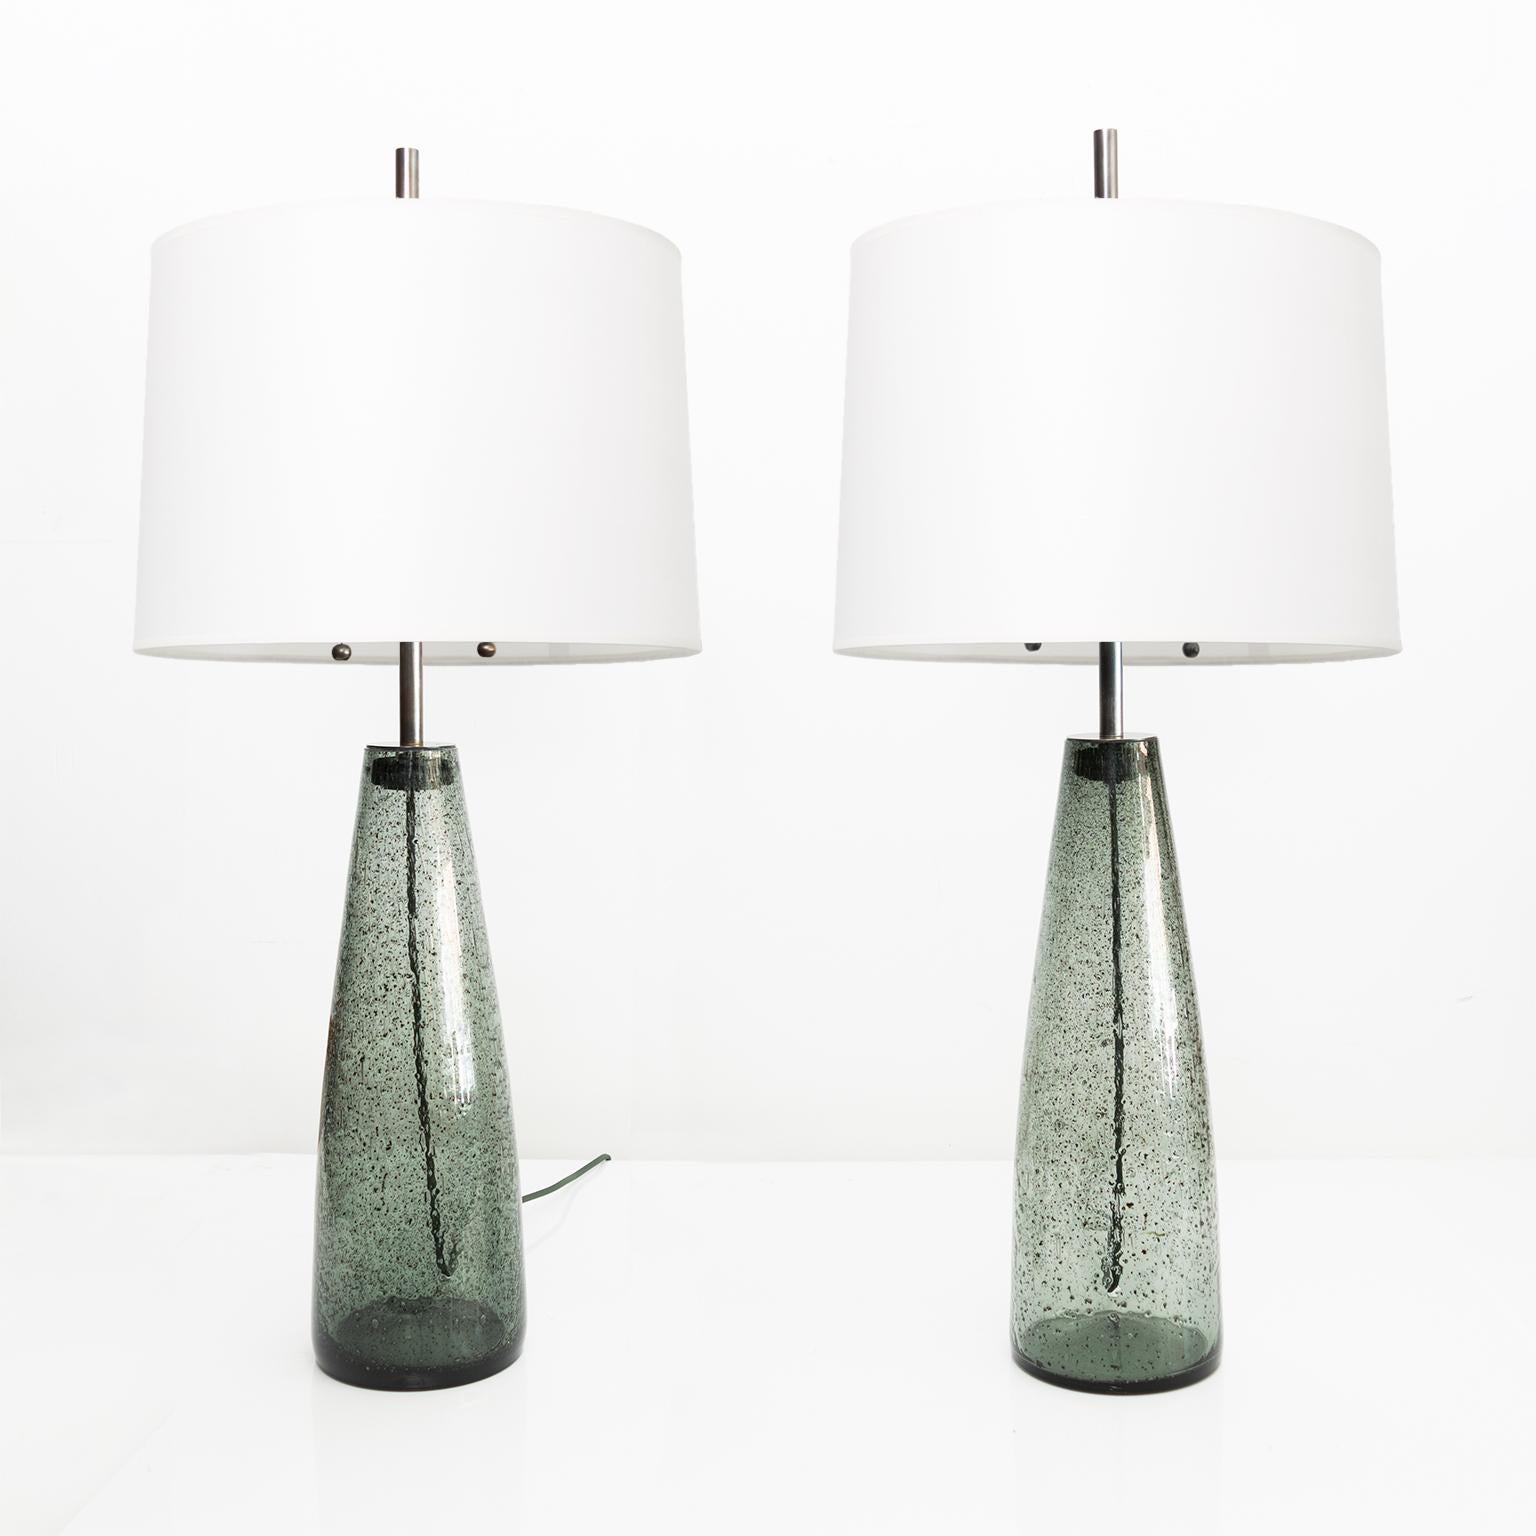 Pair of Scandinavian midcentury “Stromboli” table lamps in a smokey colored glass. Stromboli glass was created by introducing metallic powder during the blowing process. Designed by Bengt Orup and made by Hyllinge Glasbruk, Sweden, circa 1960’s